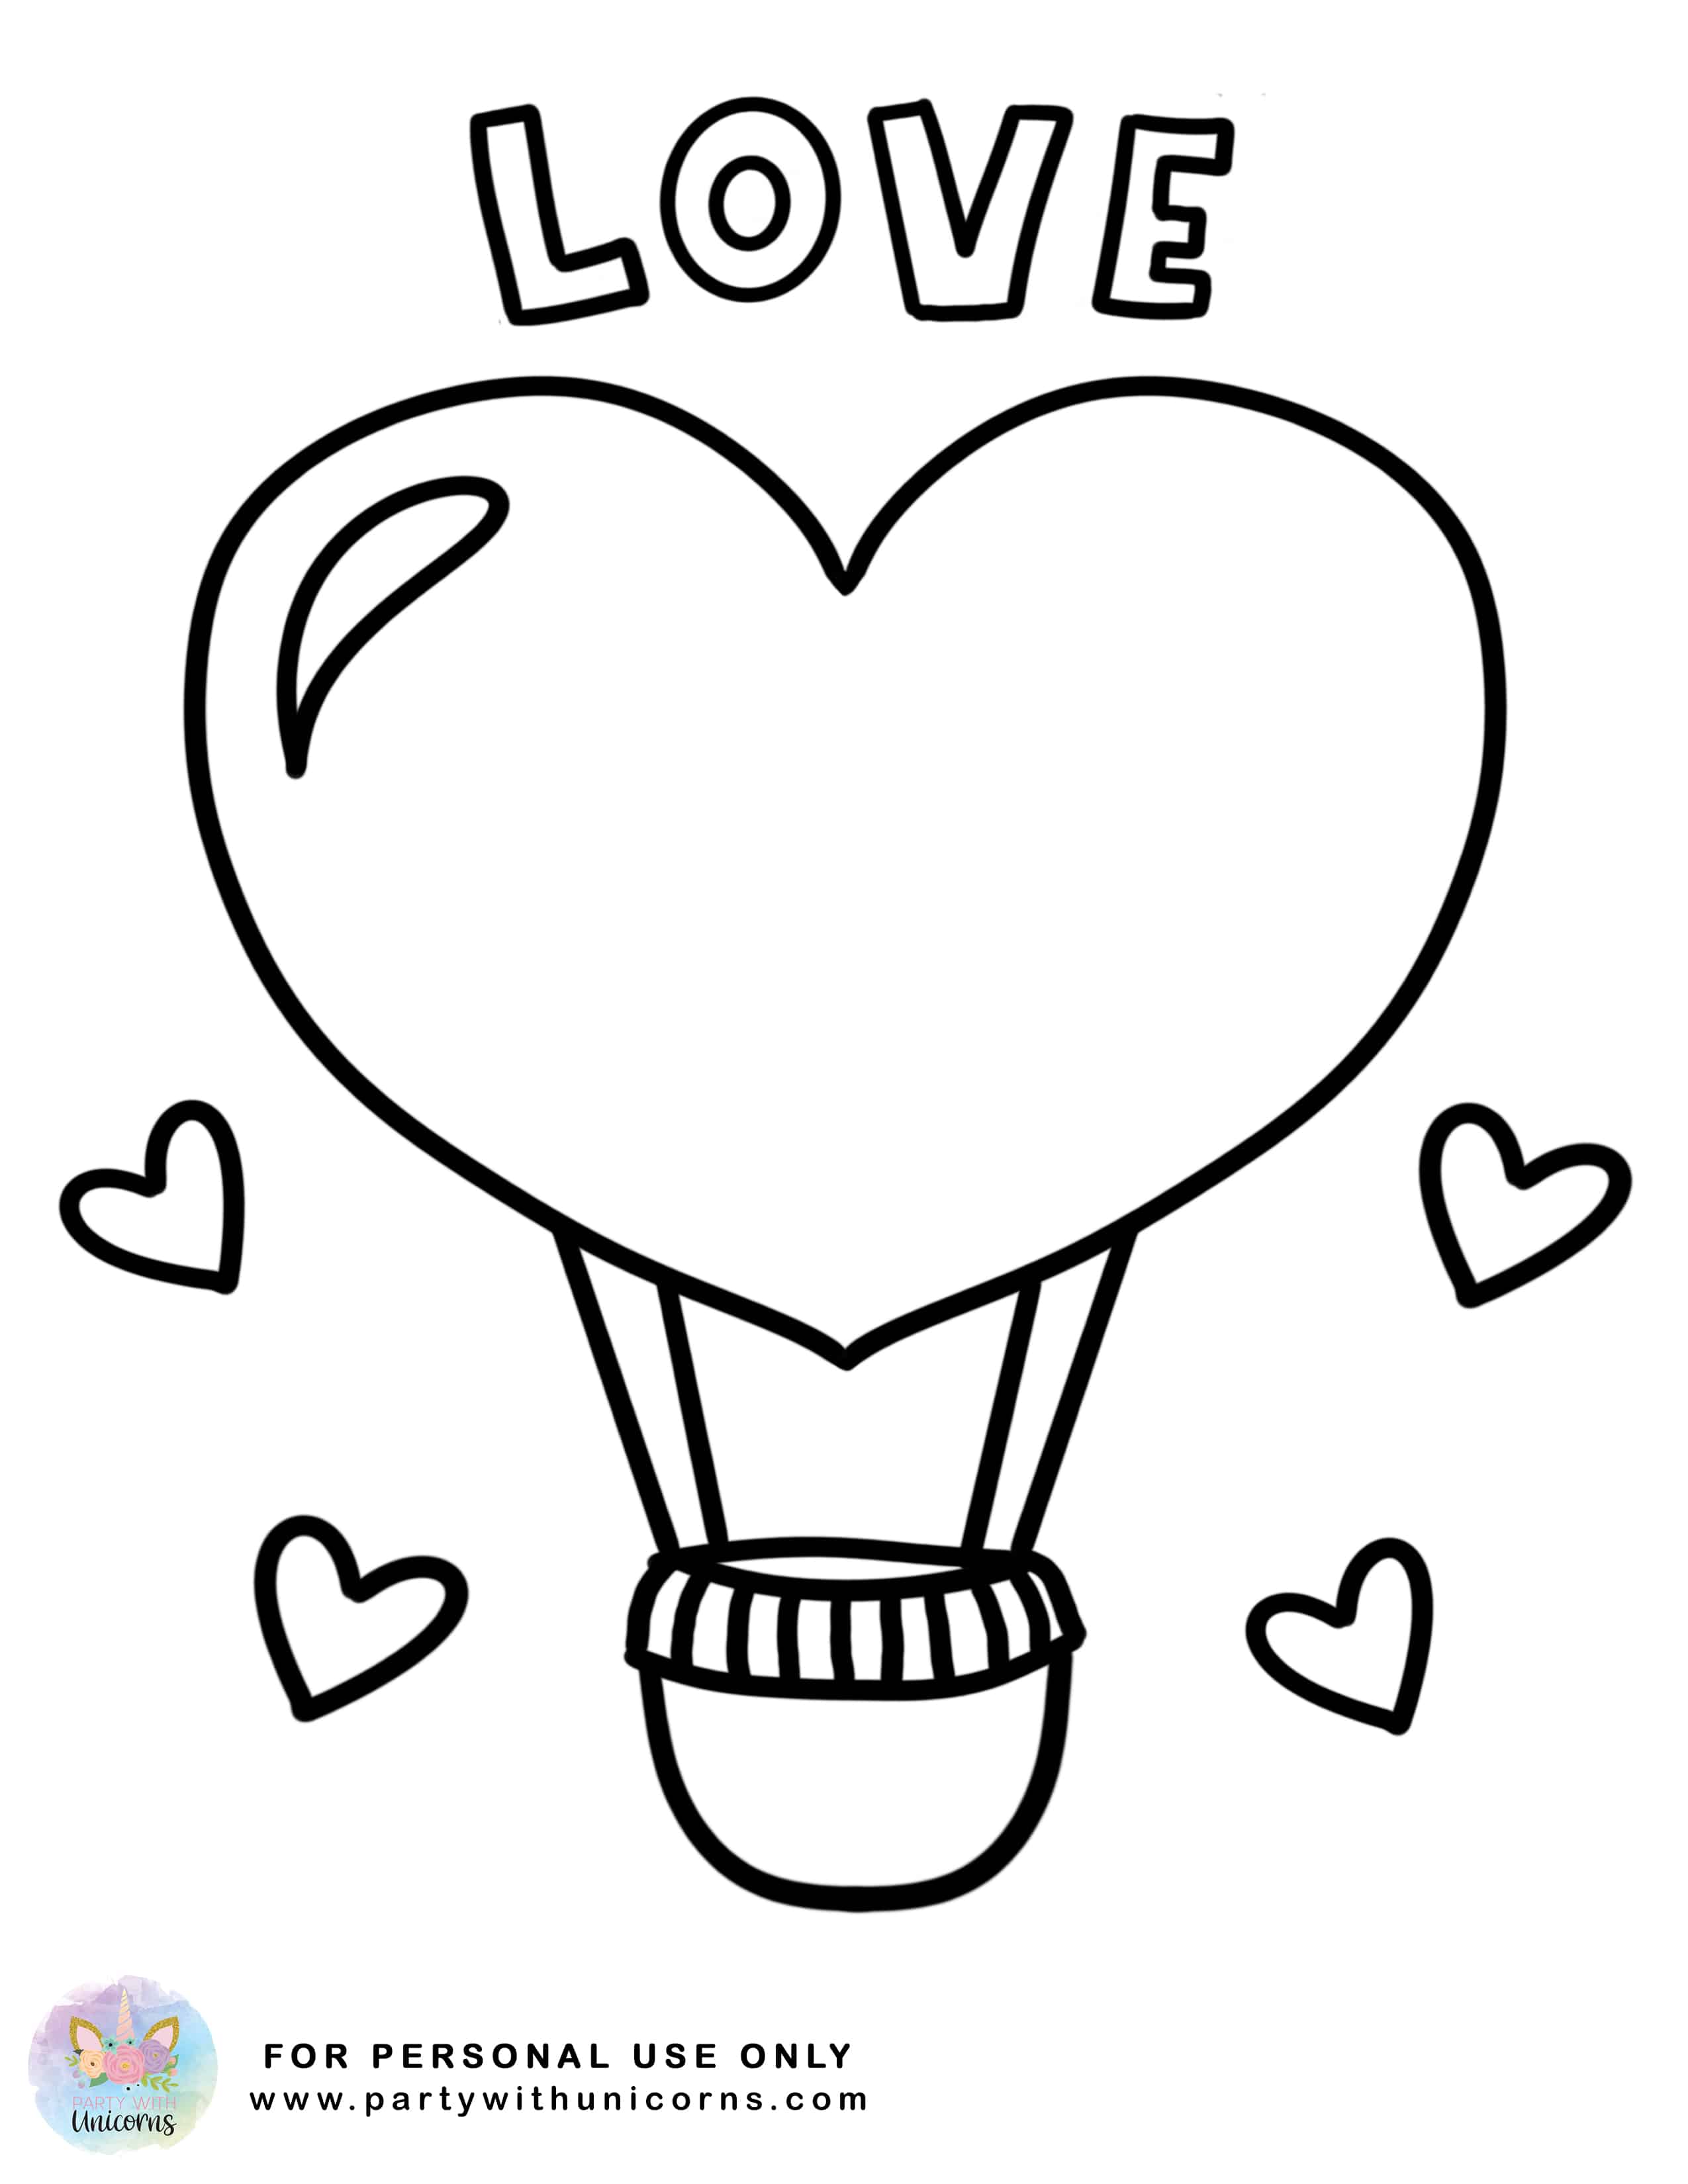 Valentines Coloring Pages   Free Coloring Pages for Kids